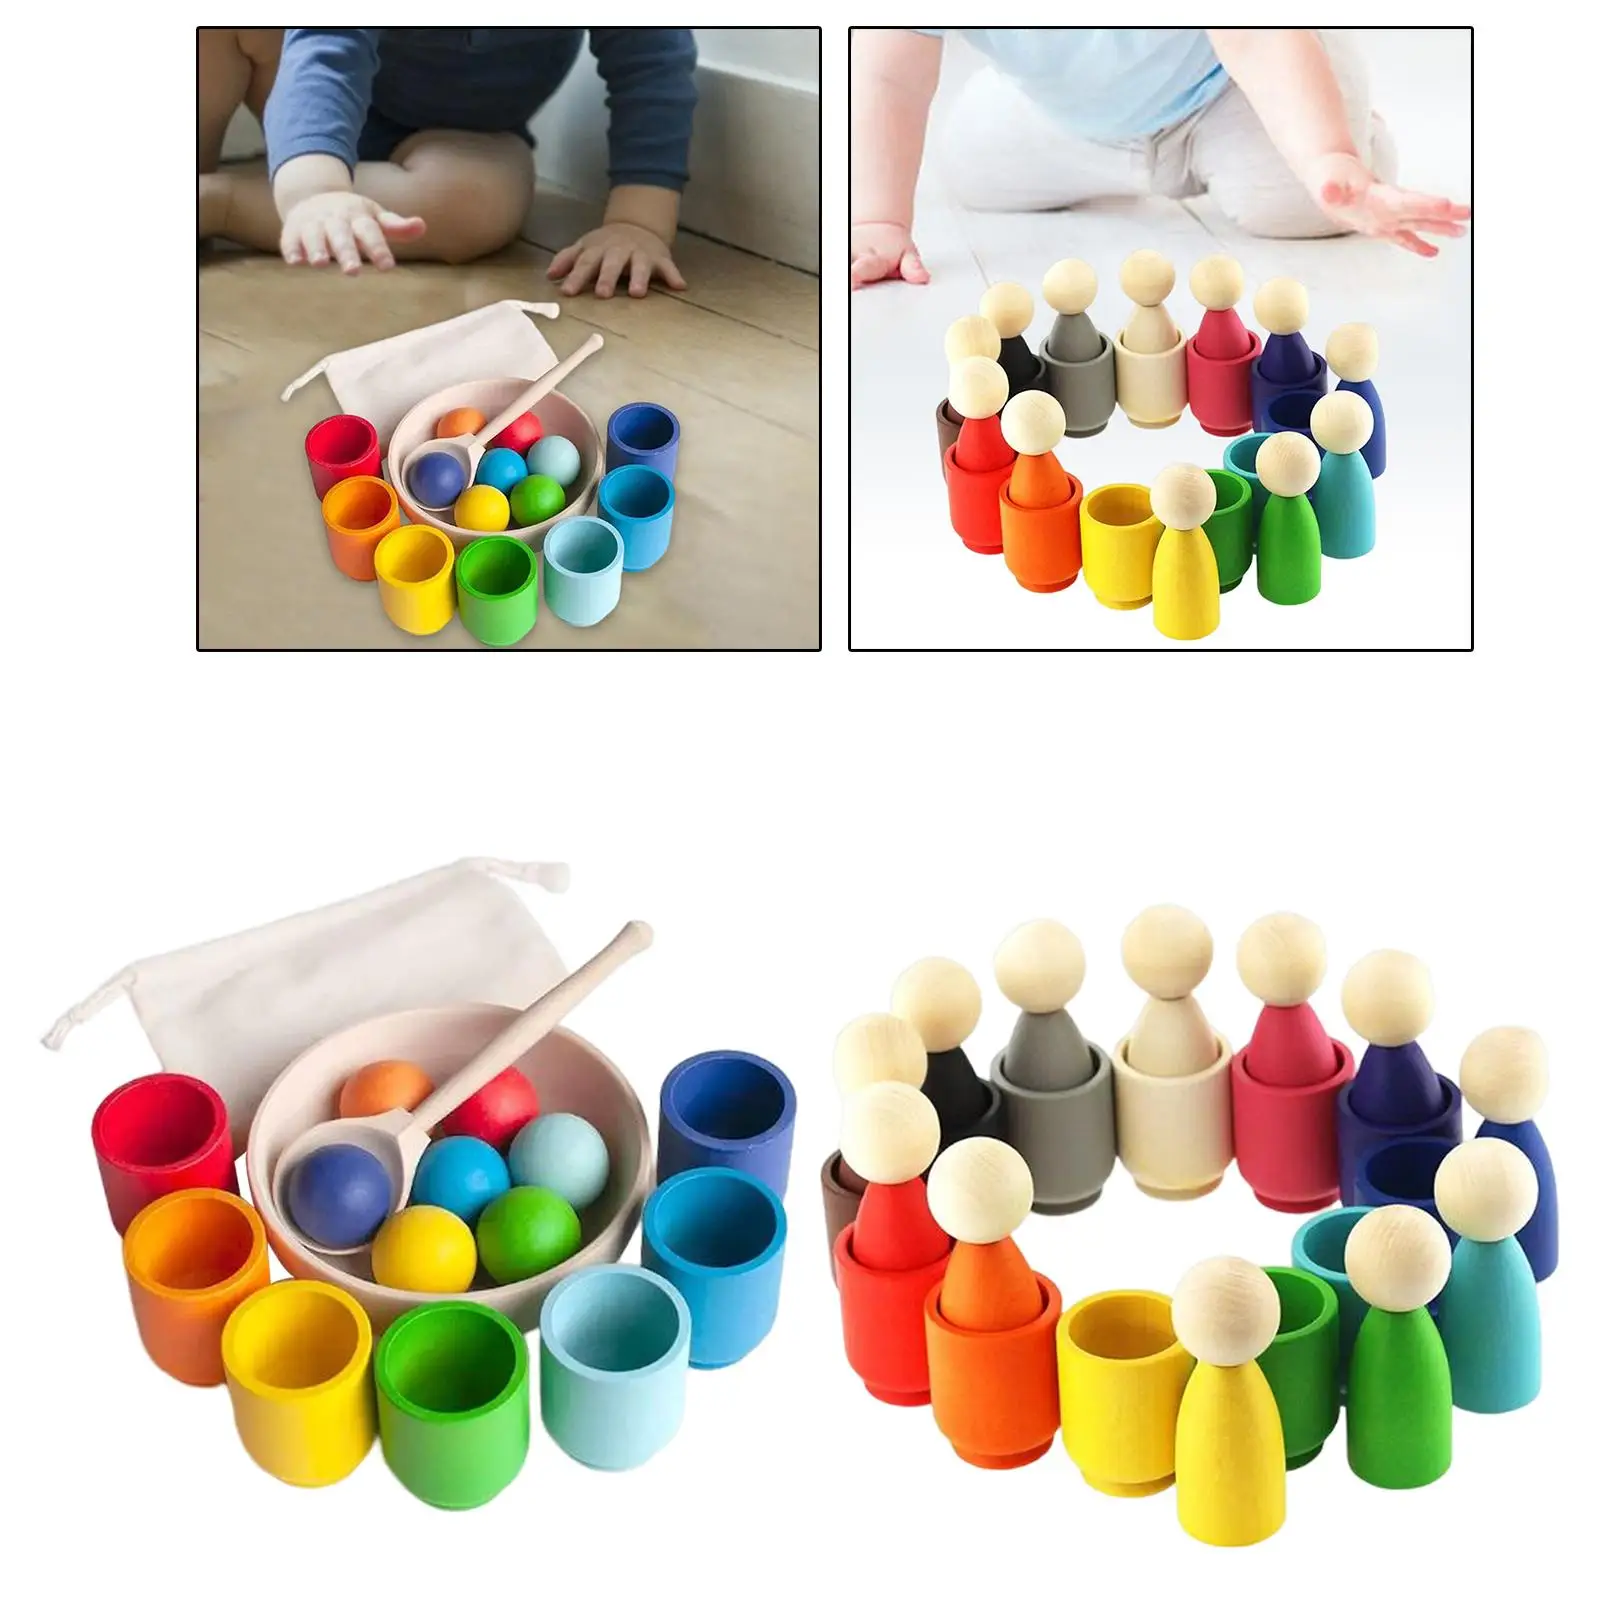 Balls in Cups Montessori Toy Preschool Sensory Toys Color Sorting Game for Boys Girls